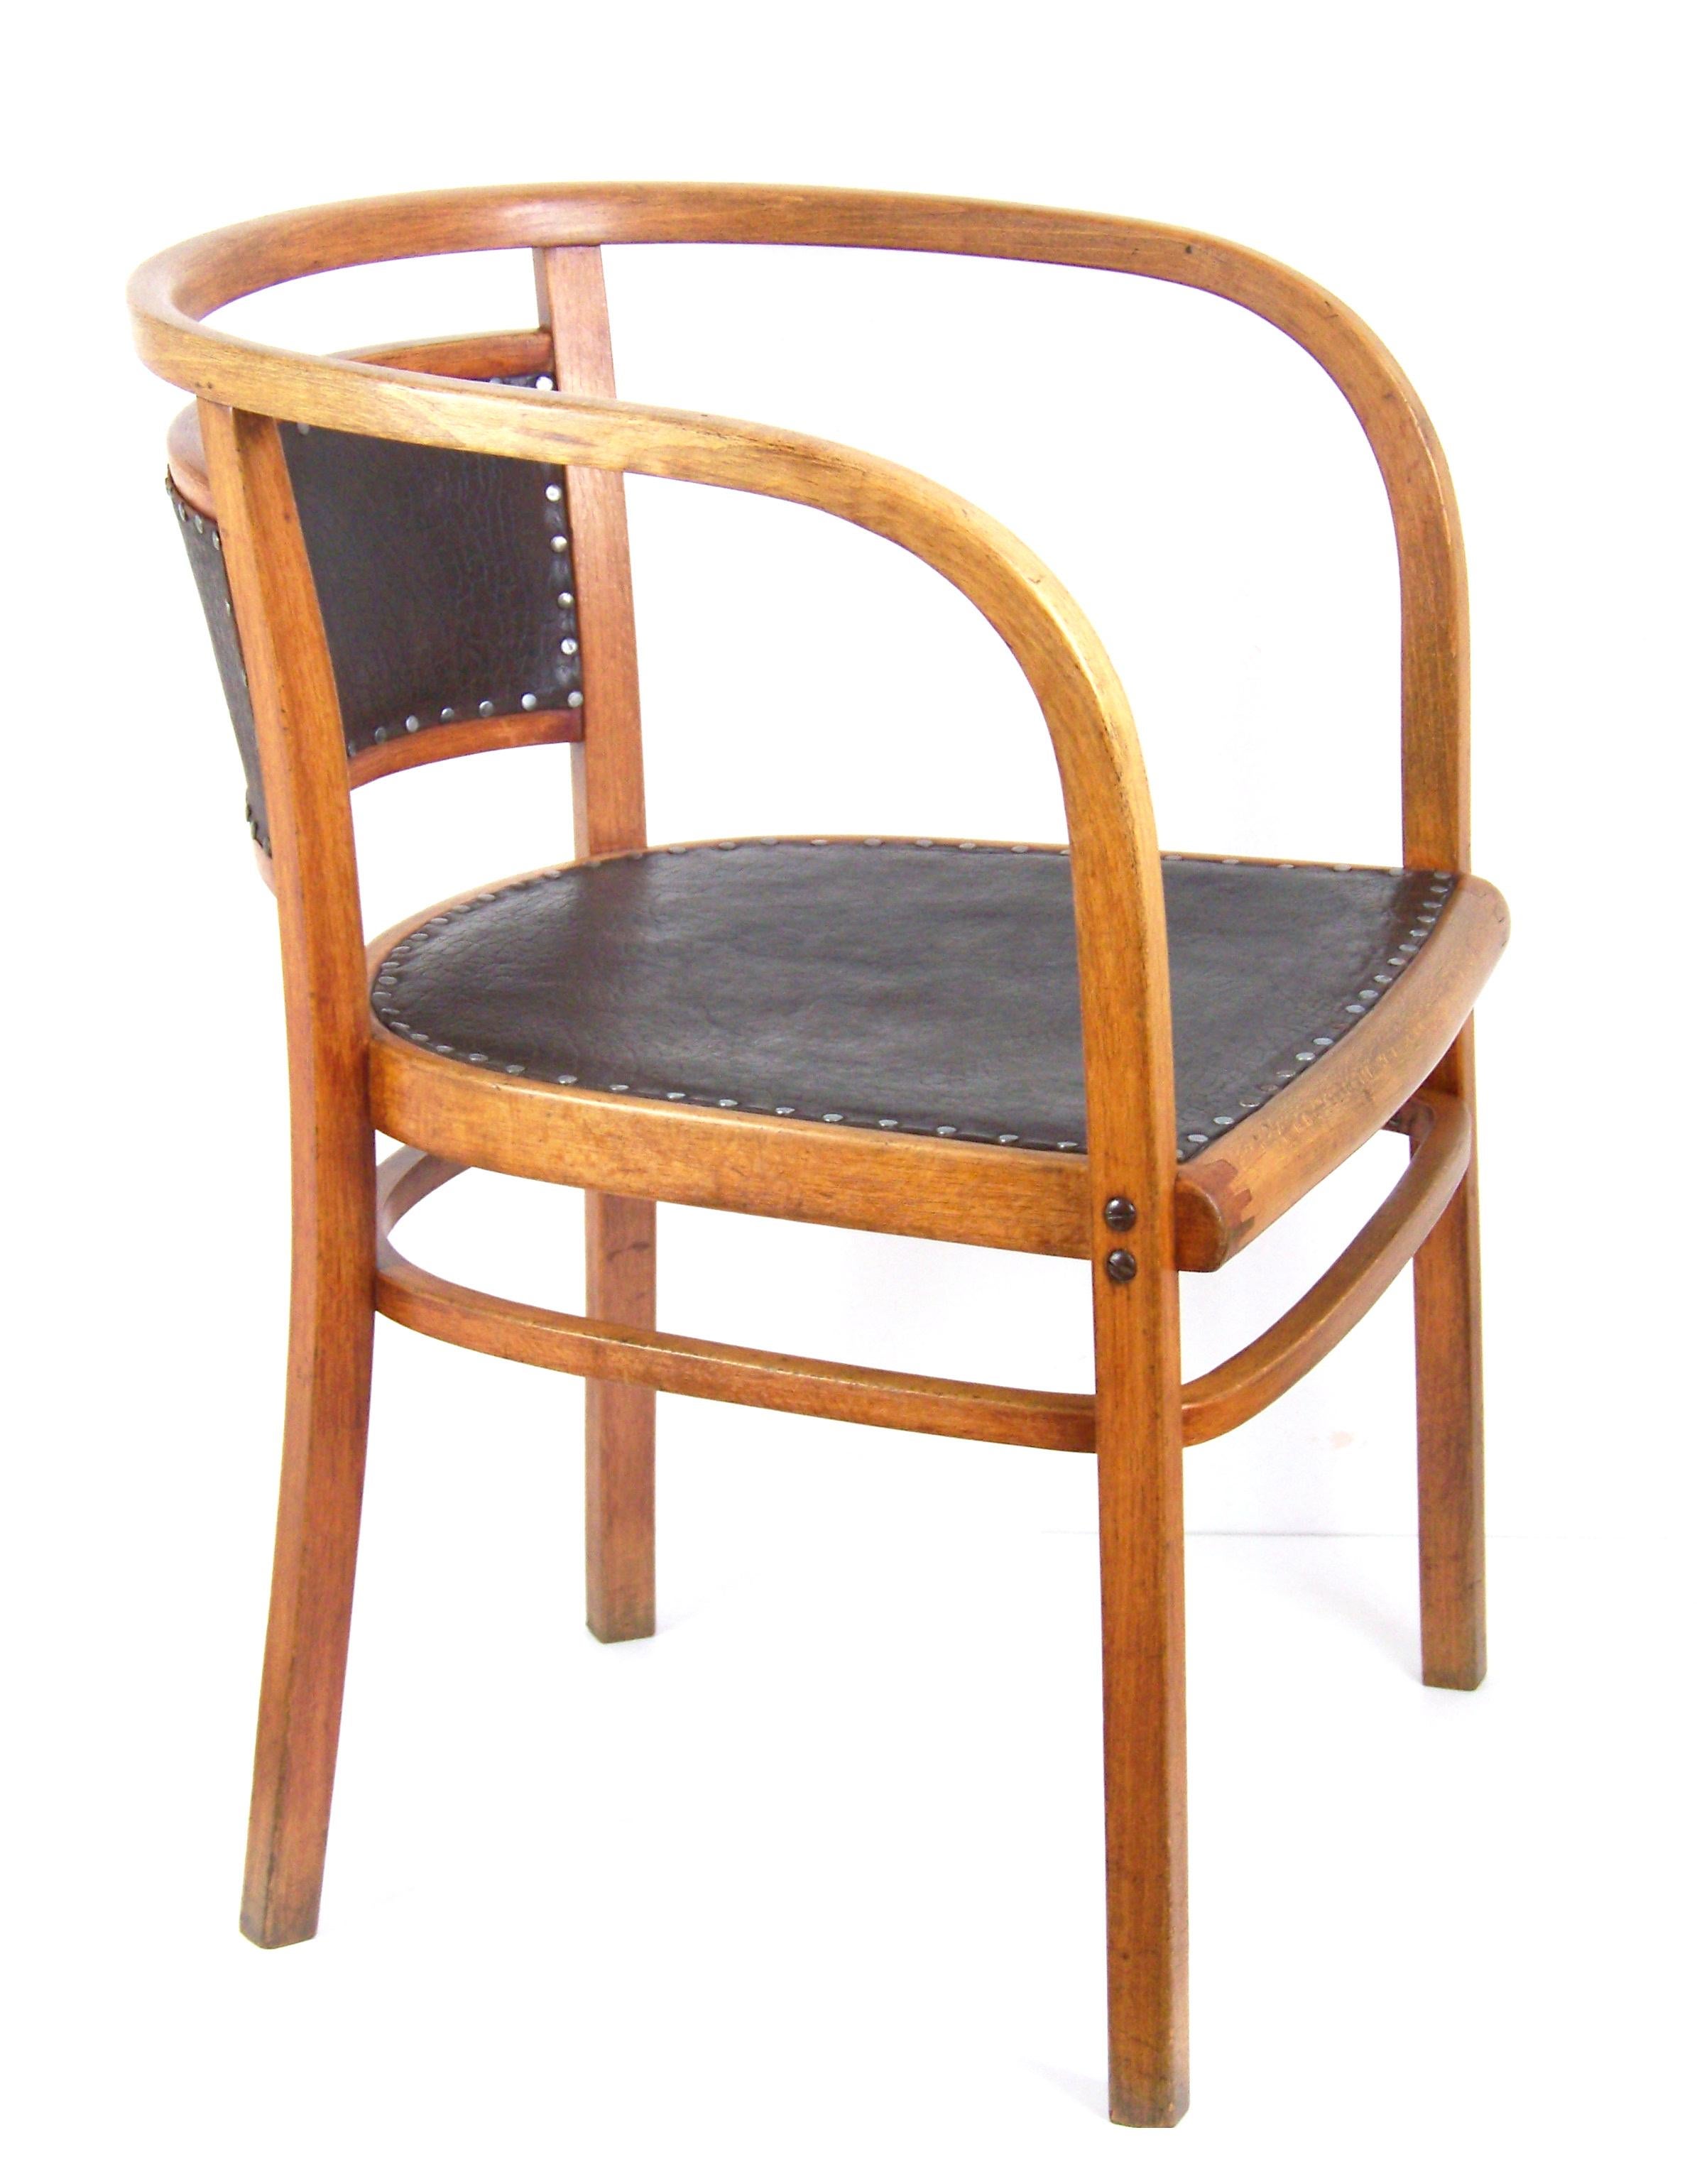 Bentwood Armchair Thonet Nr.6526 by Otto Wagner, 1902-1918